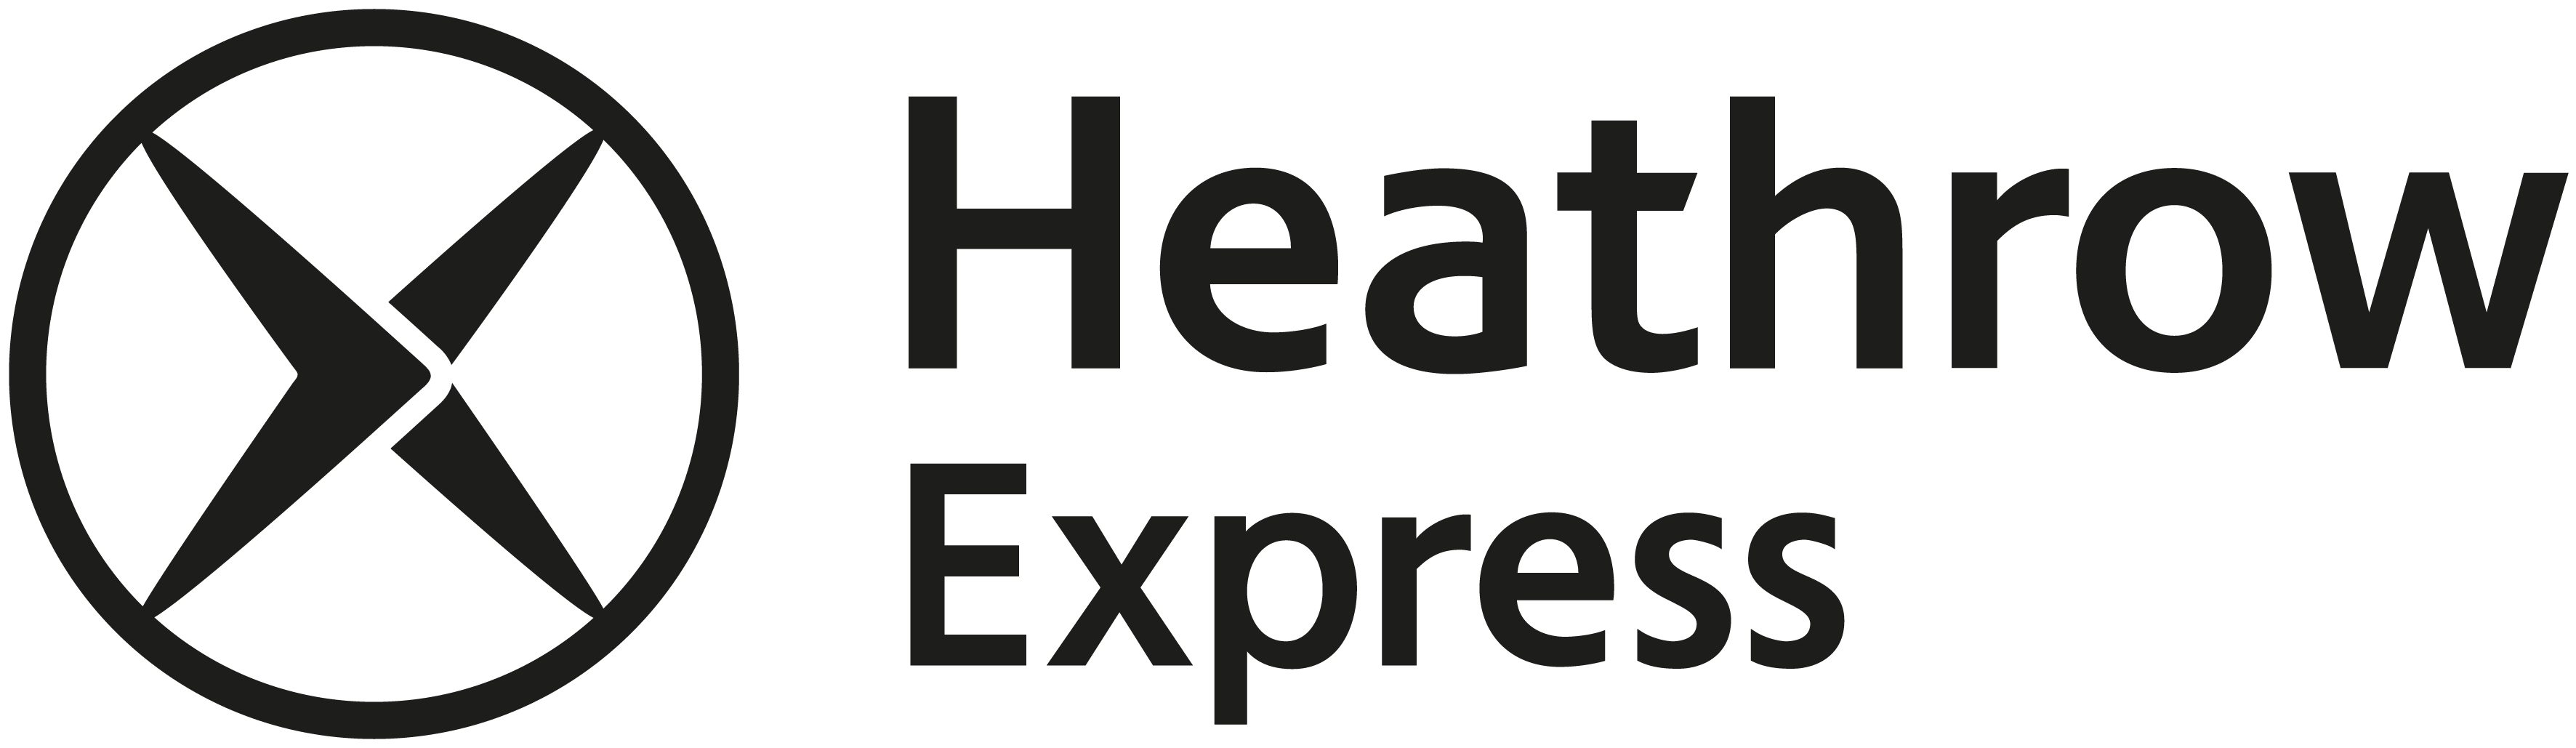 Heathrow Express Coupon Codes Up To 60 OFF (31 Working Codes) June